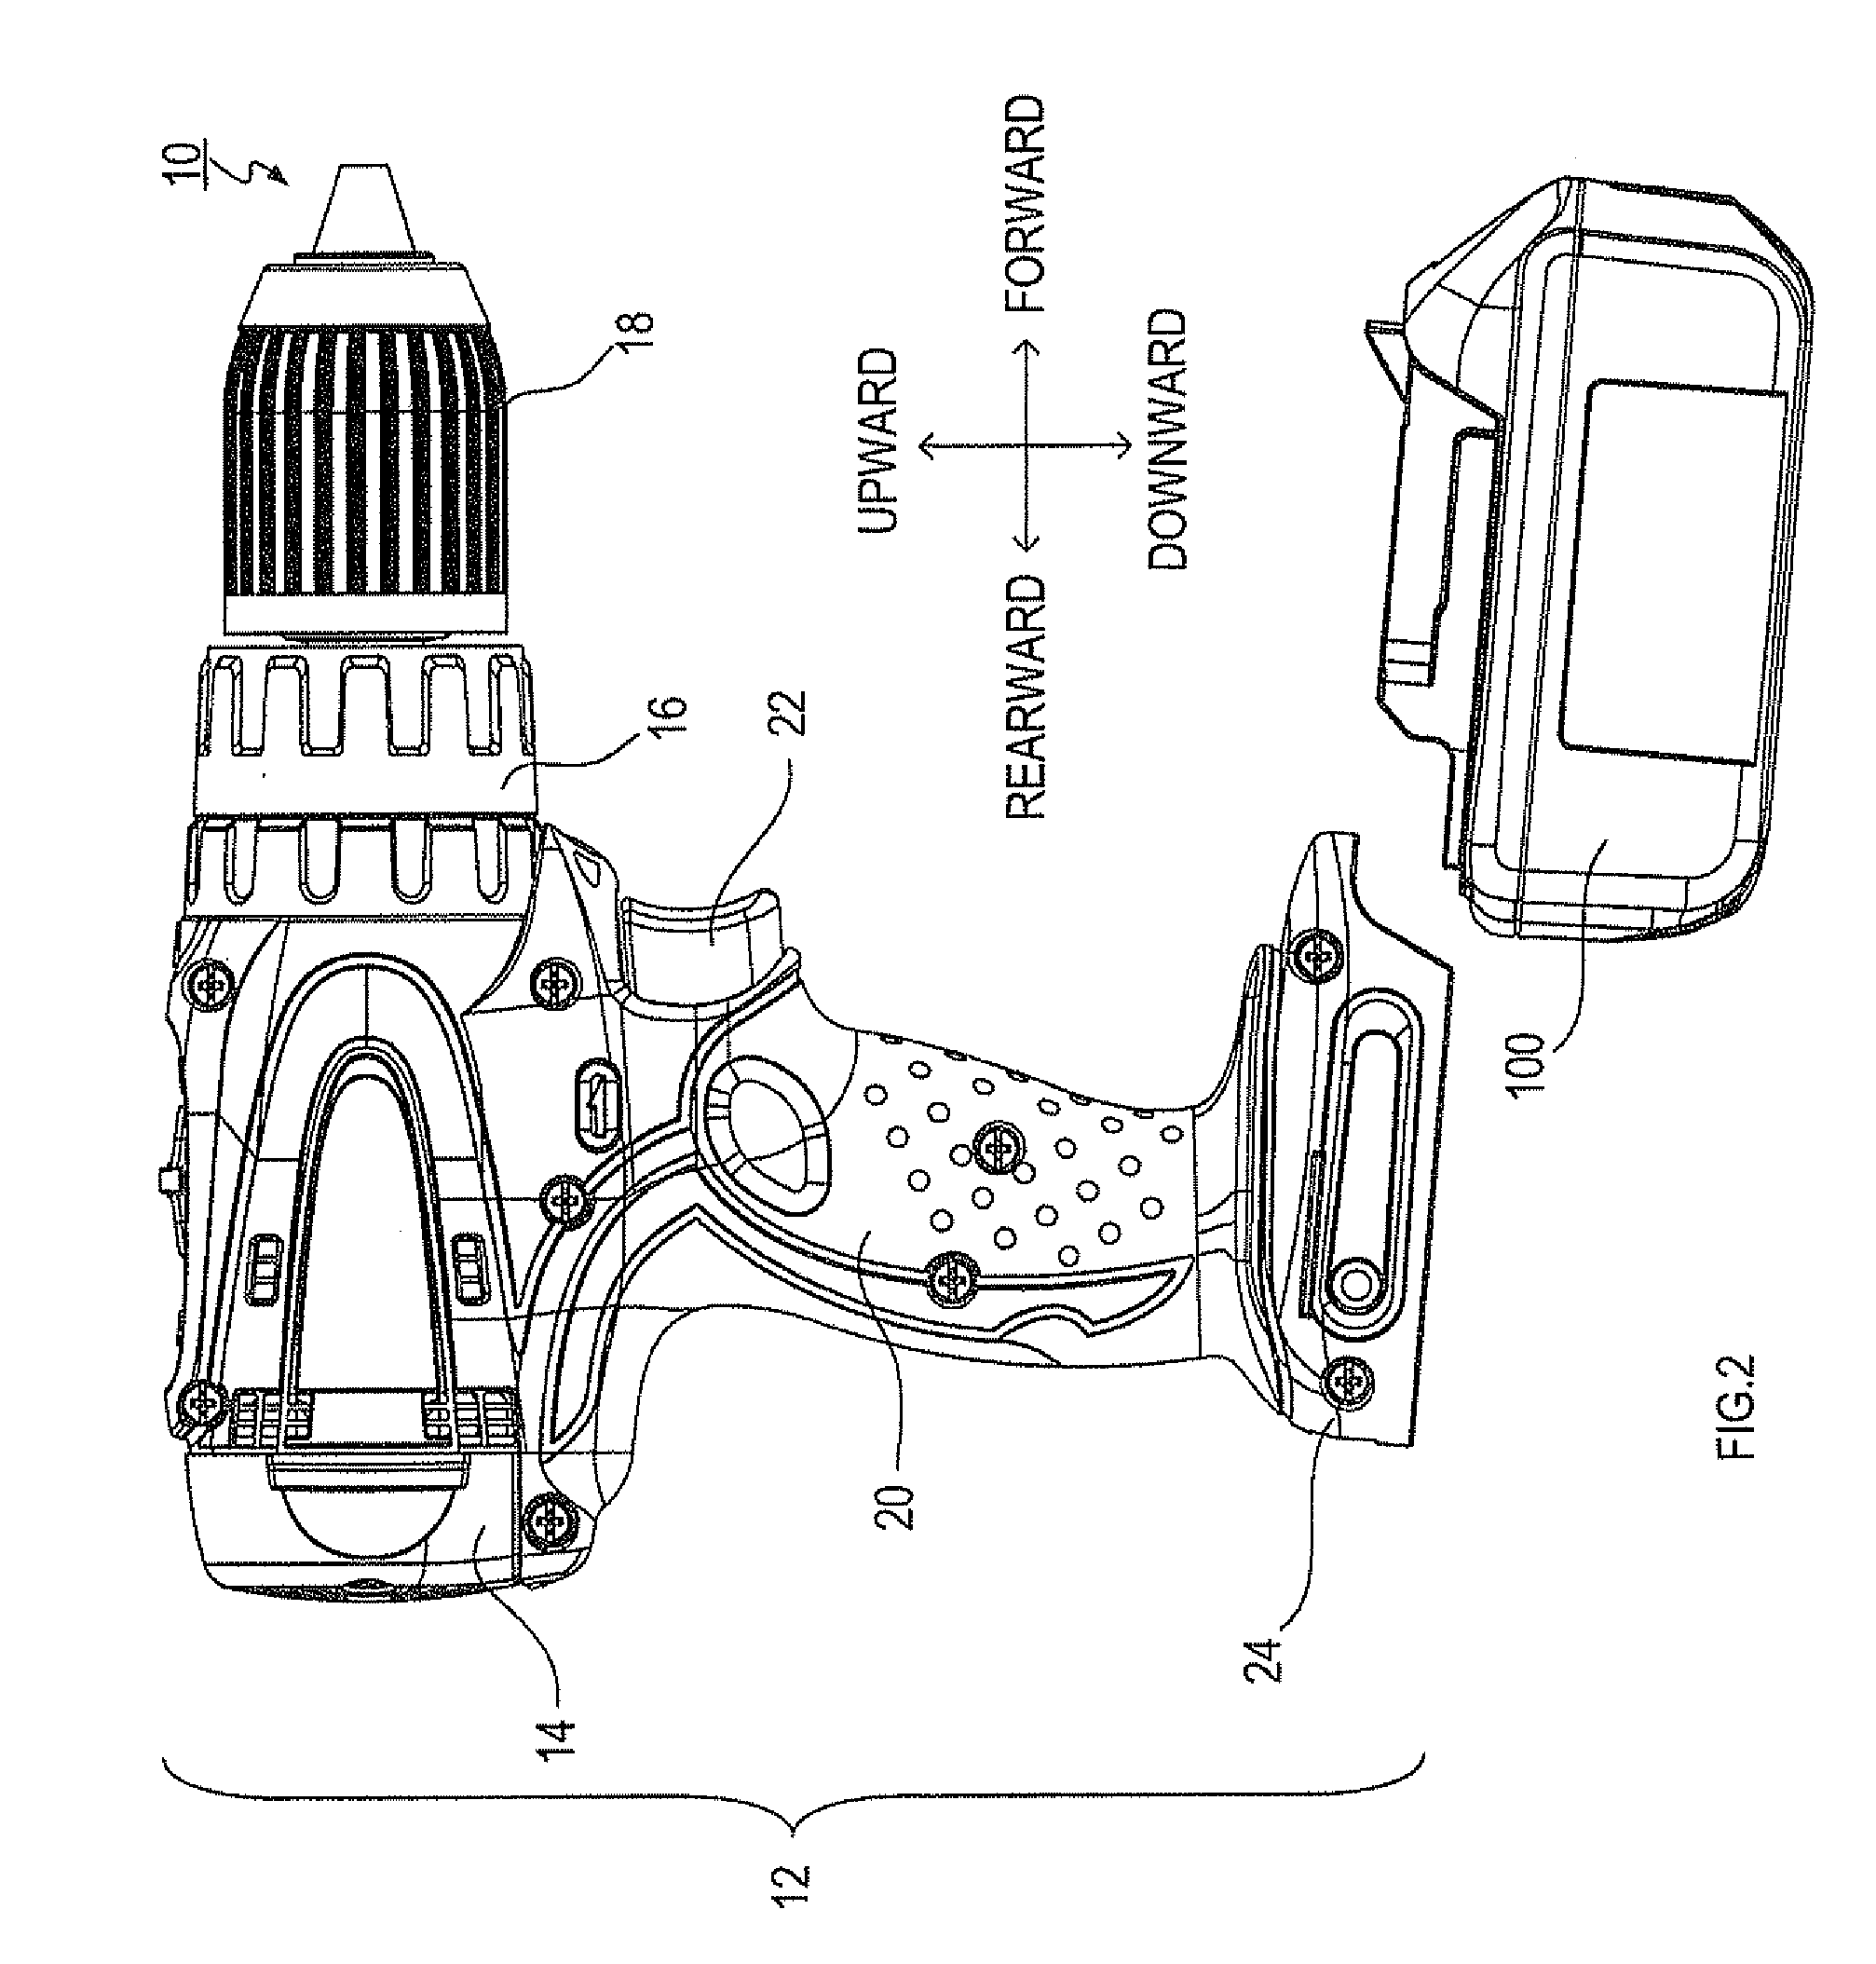 Battery pack for electric power tool, and battery connection device